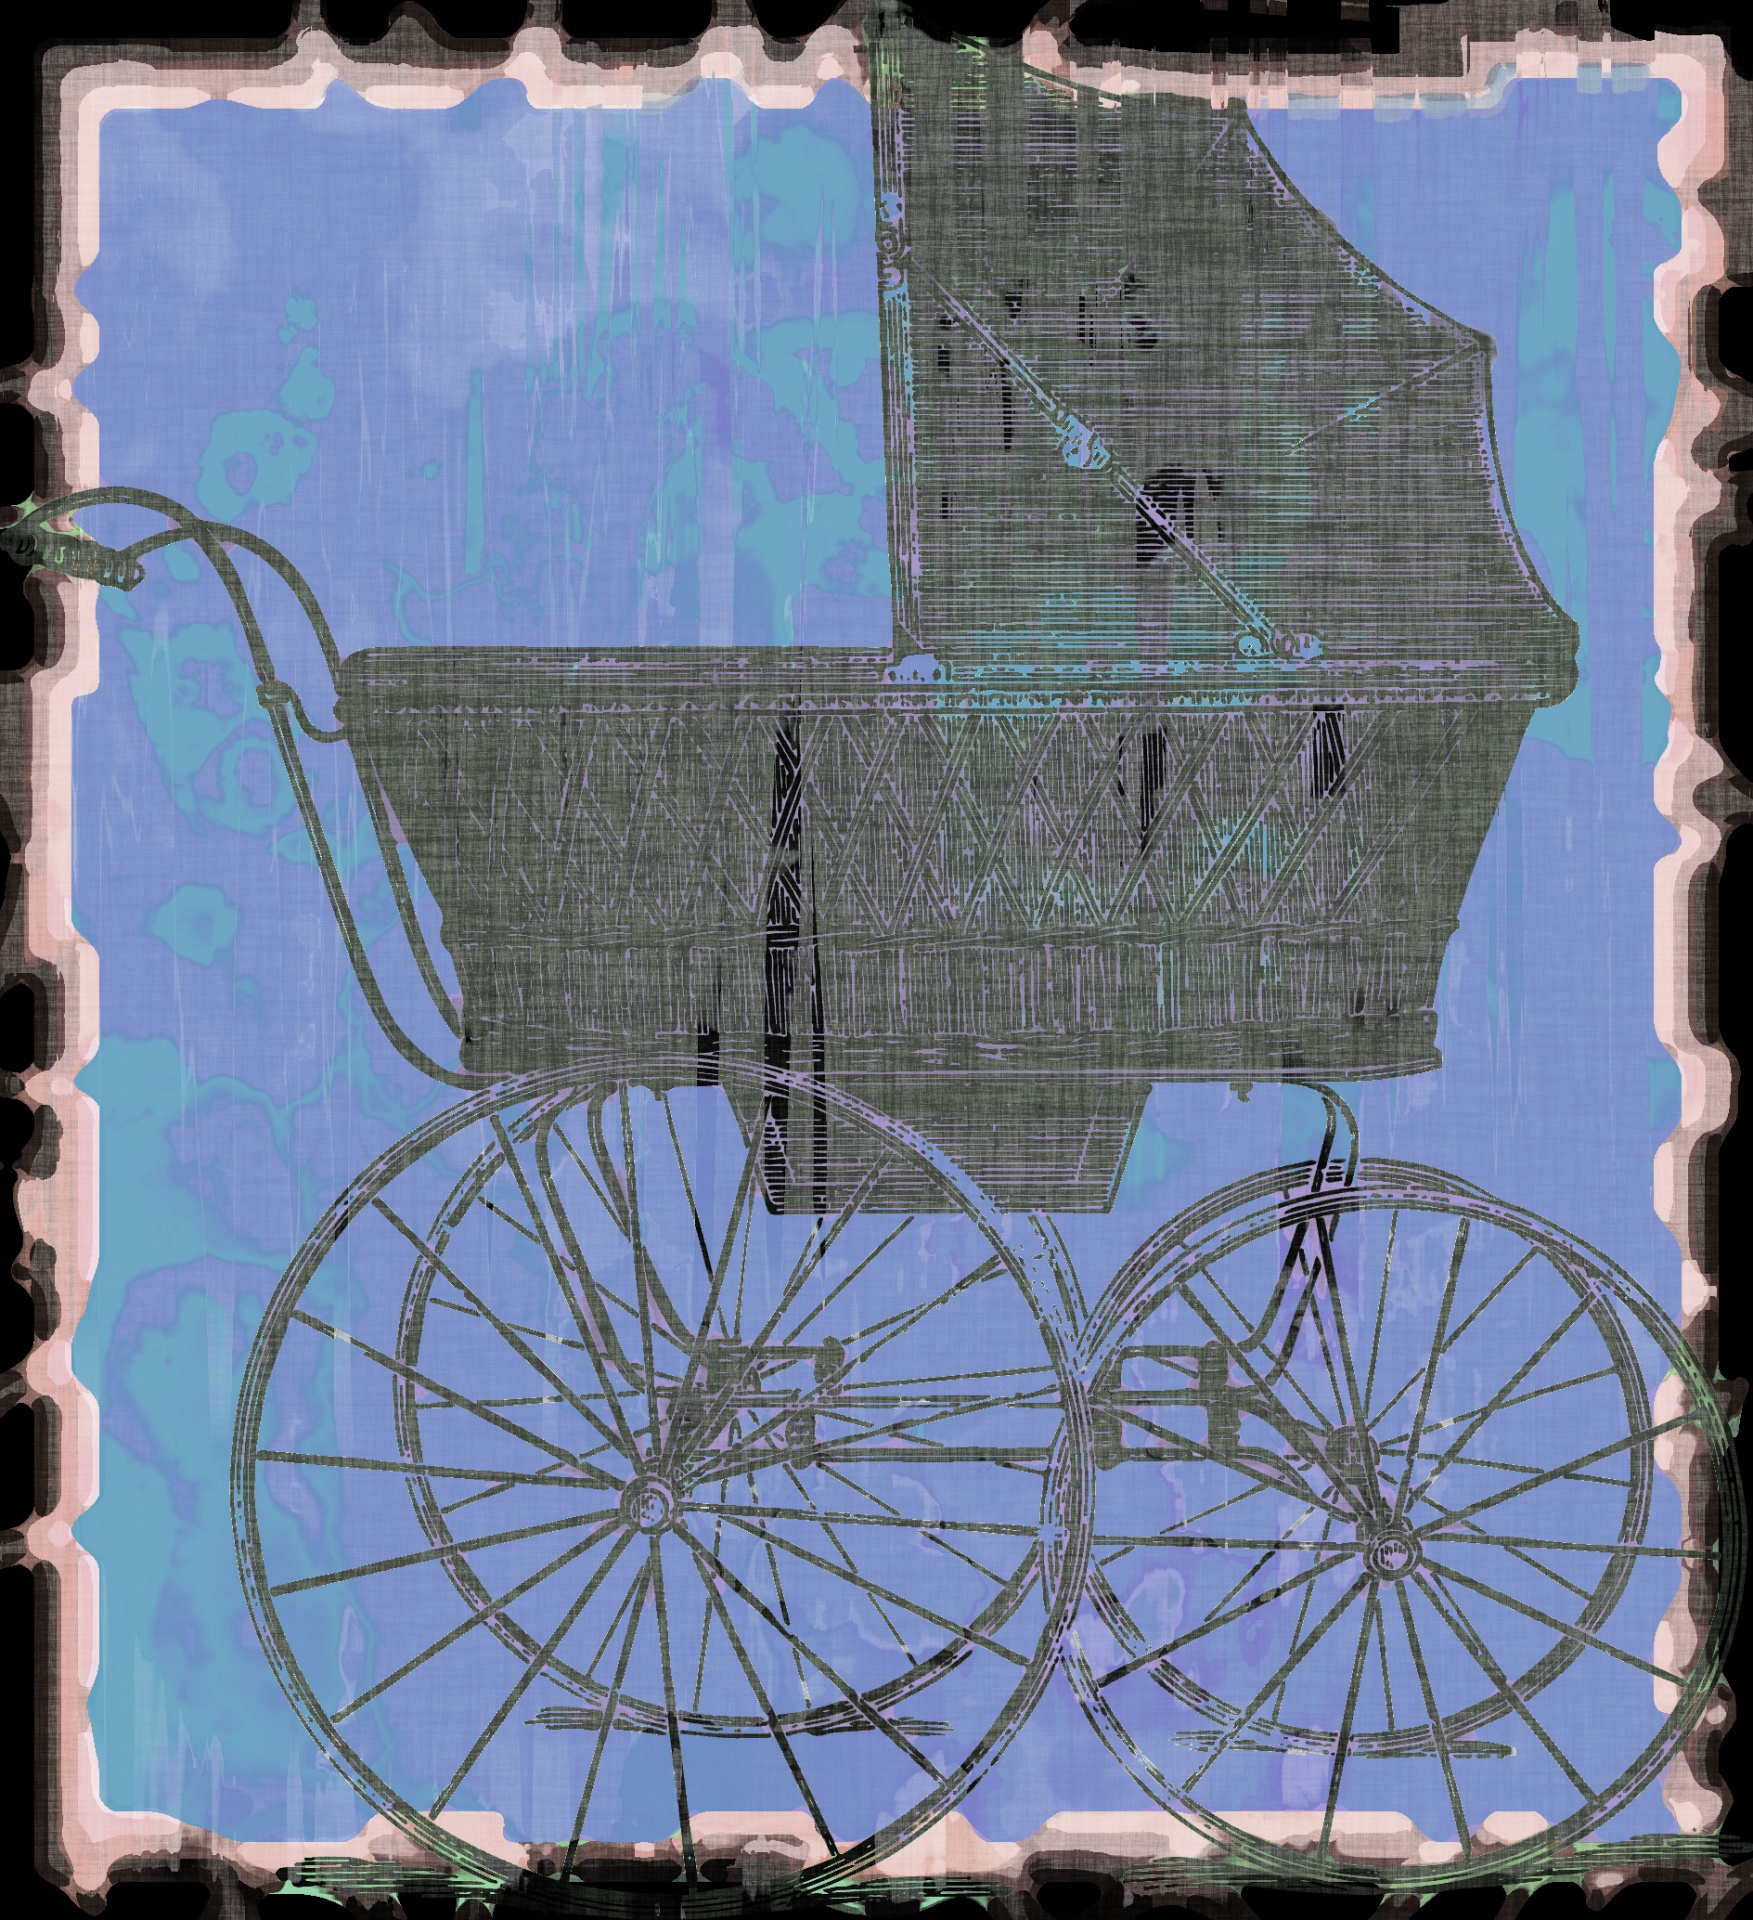 Vintage Baby Buggy